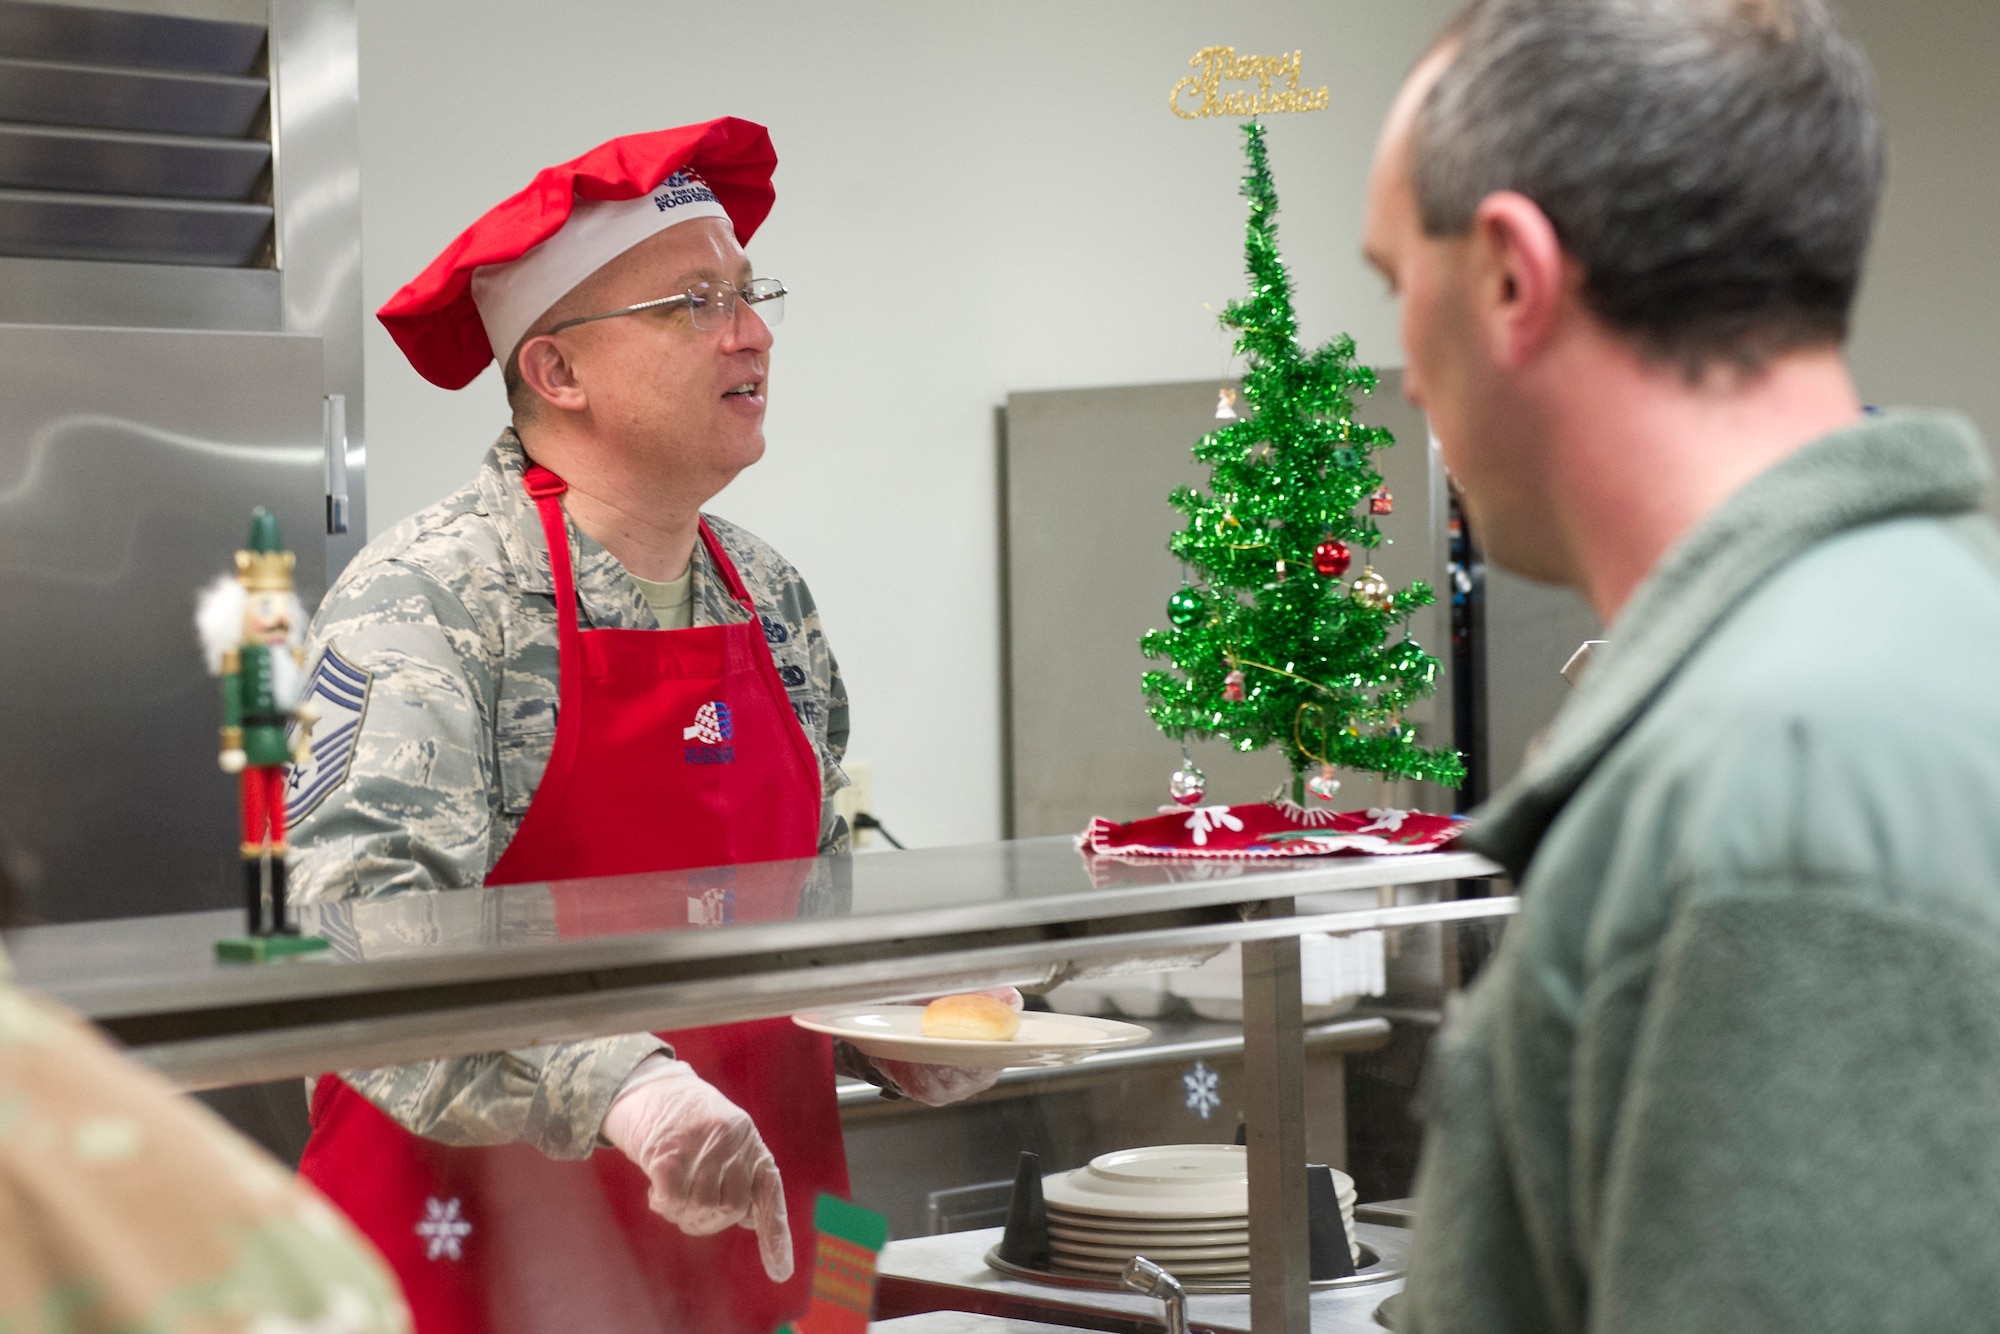 Chief Master Sgt. Wes Marion, 434th Air Refueling Wing command chief, serves lunch to Airmen in the dining facility at Grissom Air Reserve Base, Indiana, Dec. 7, 2019. Wing leadership and GCC members helped served holiday staples prepared by the 434th Force Support Squadron during the December Unit Training Assembly. (U.S. Air Force photo/ Staff Sgt. Courtney Dotson-Essett)